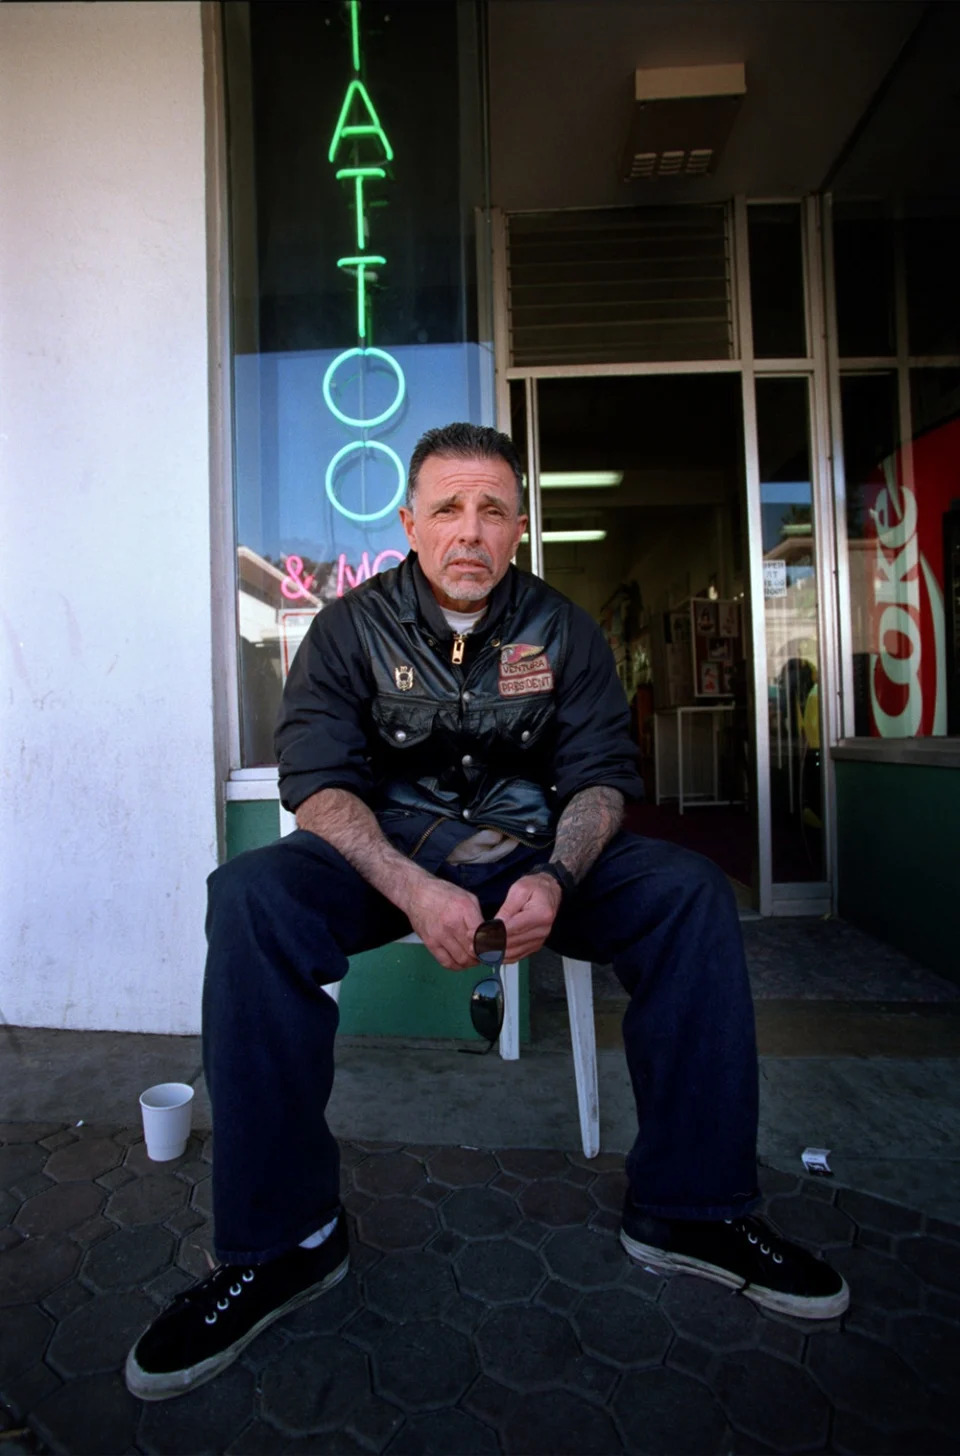 George Christie sitting in front of a tattoo shop.